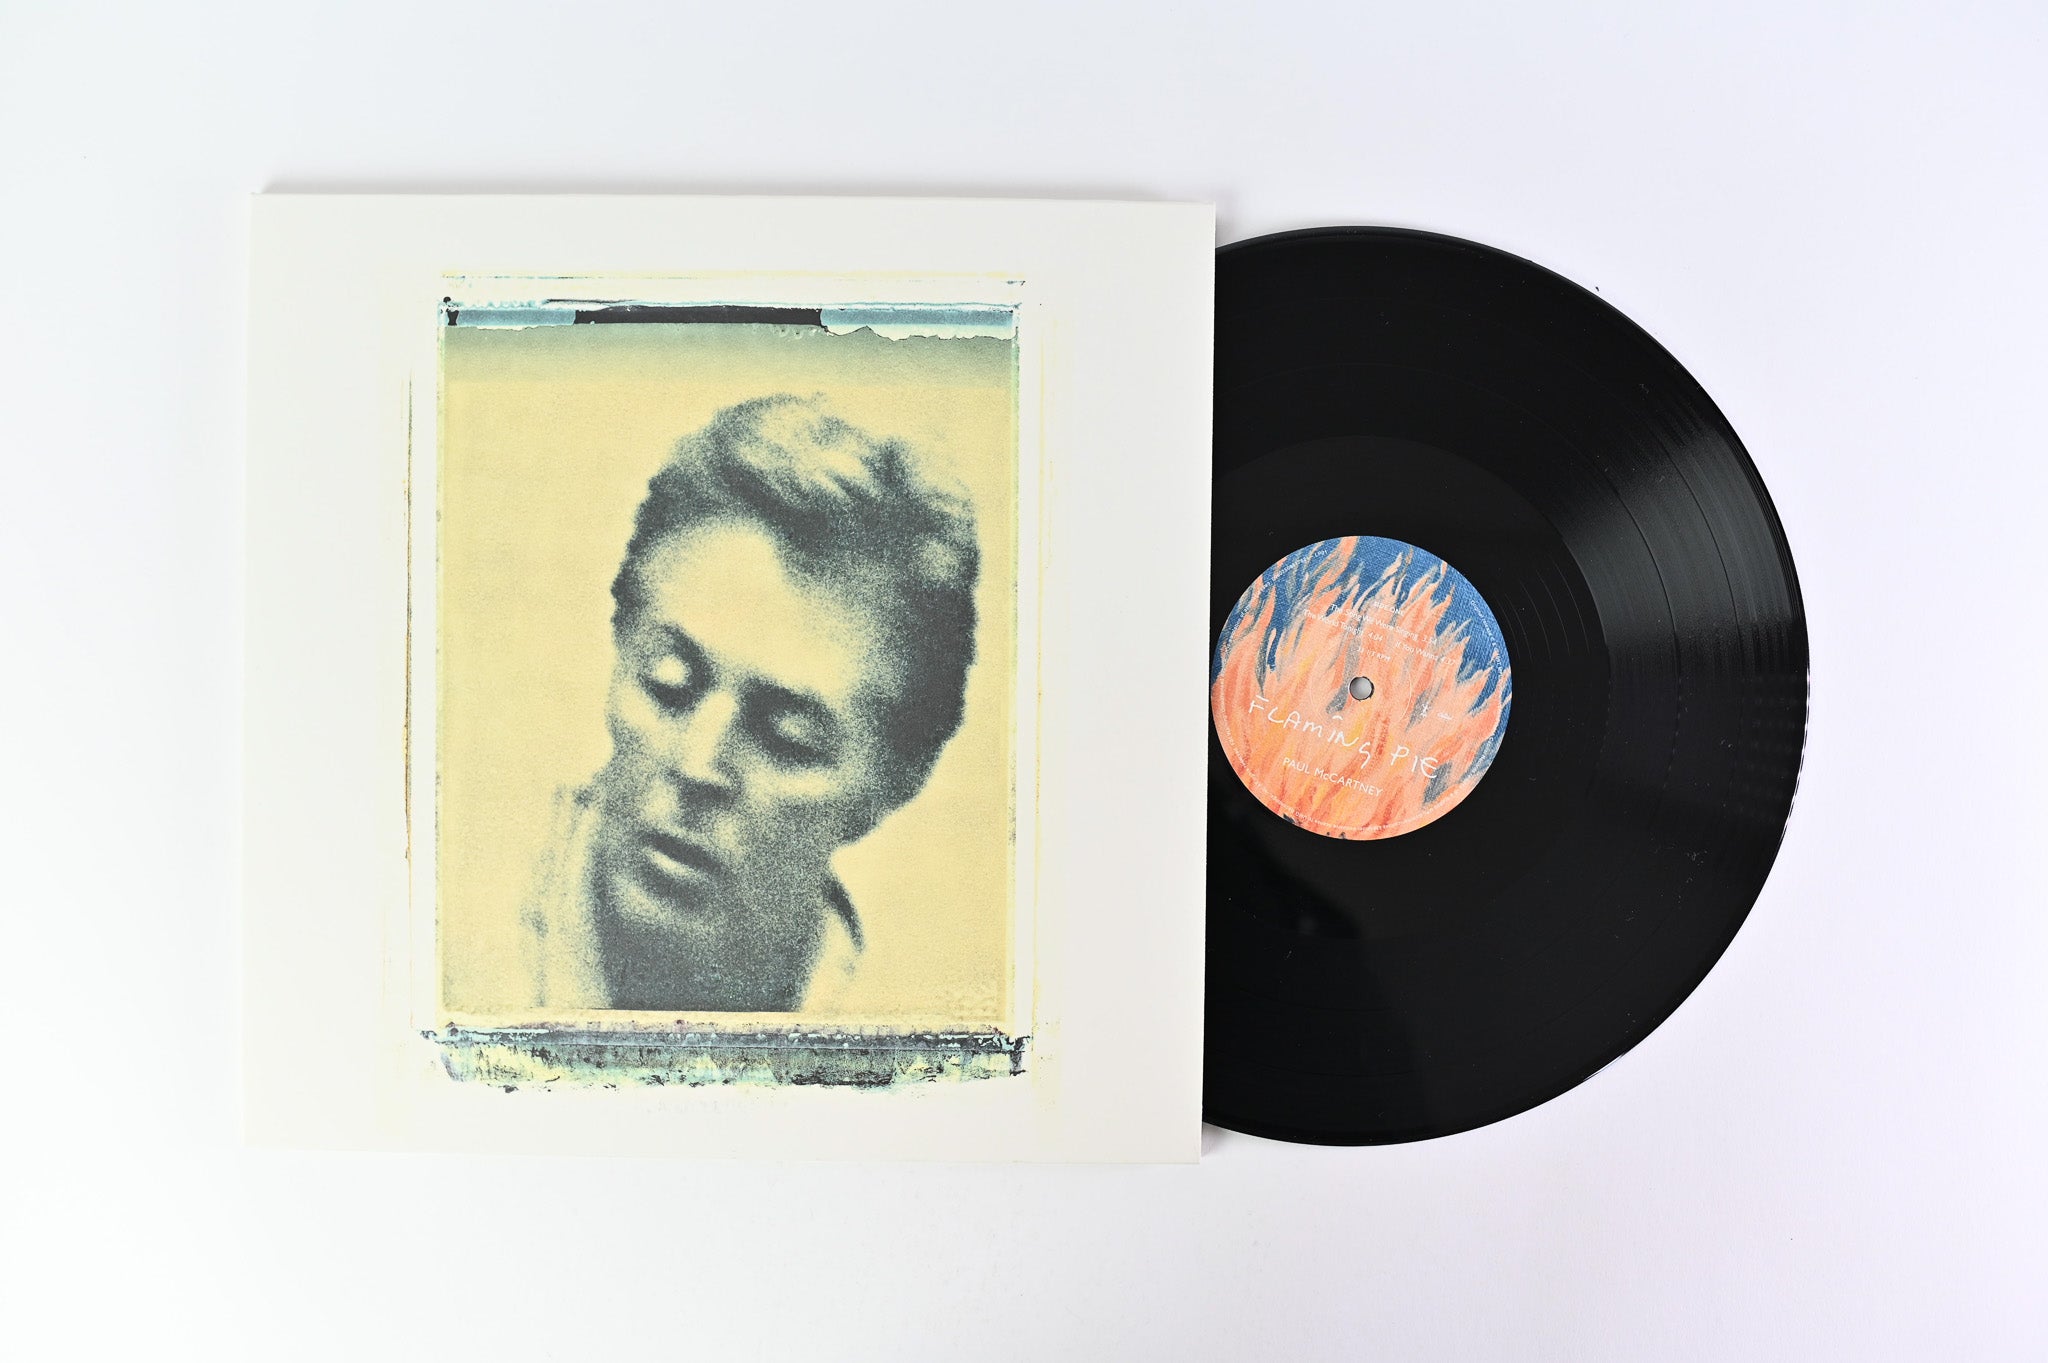 Paul McCartney - Flaming Pie on MPL - Numbered Collectors Edition